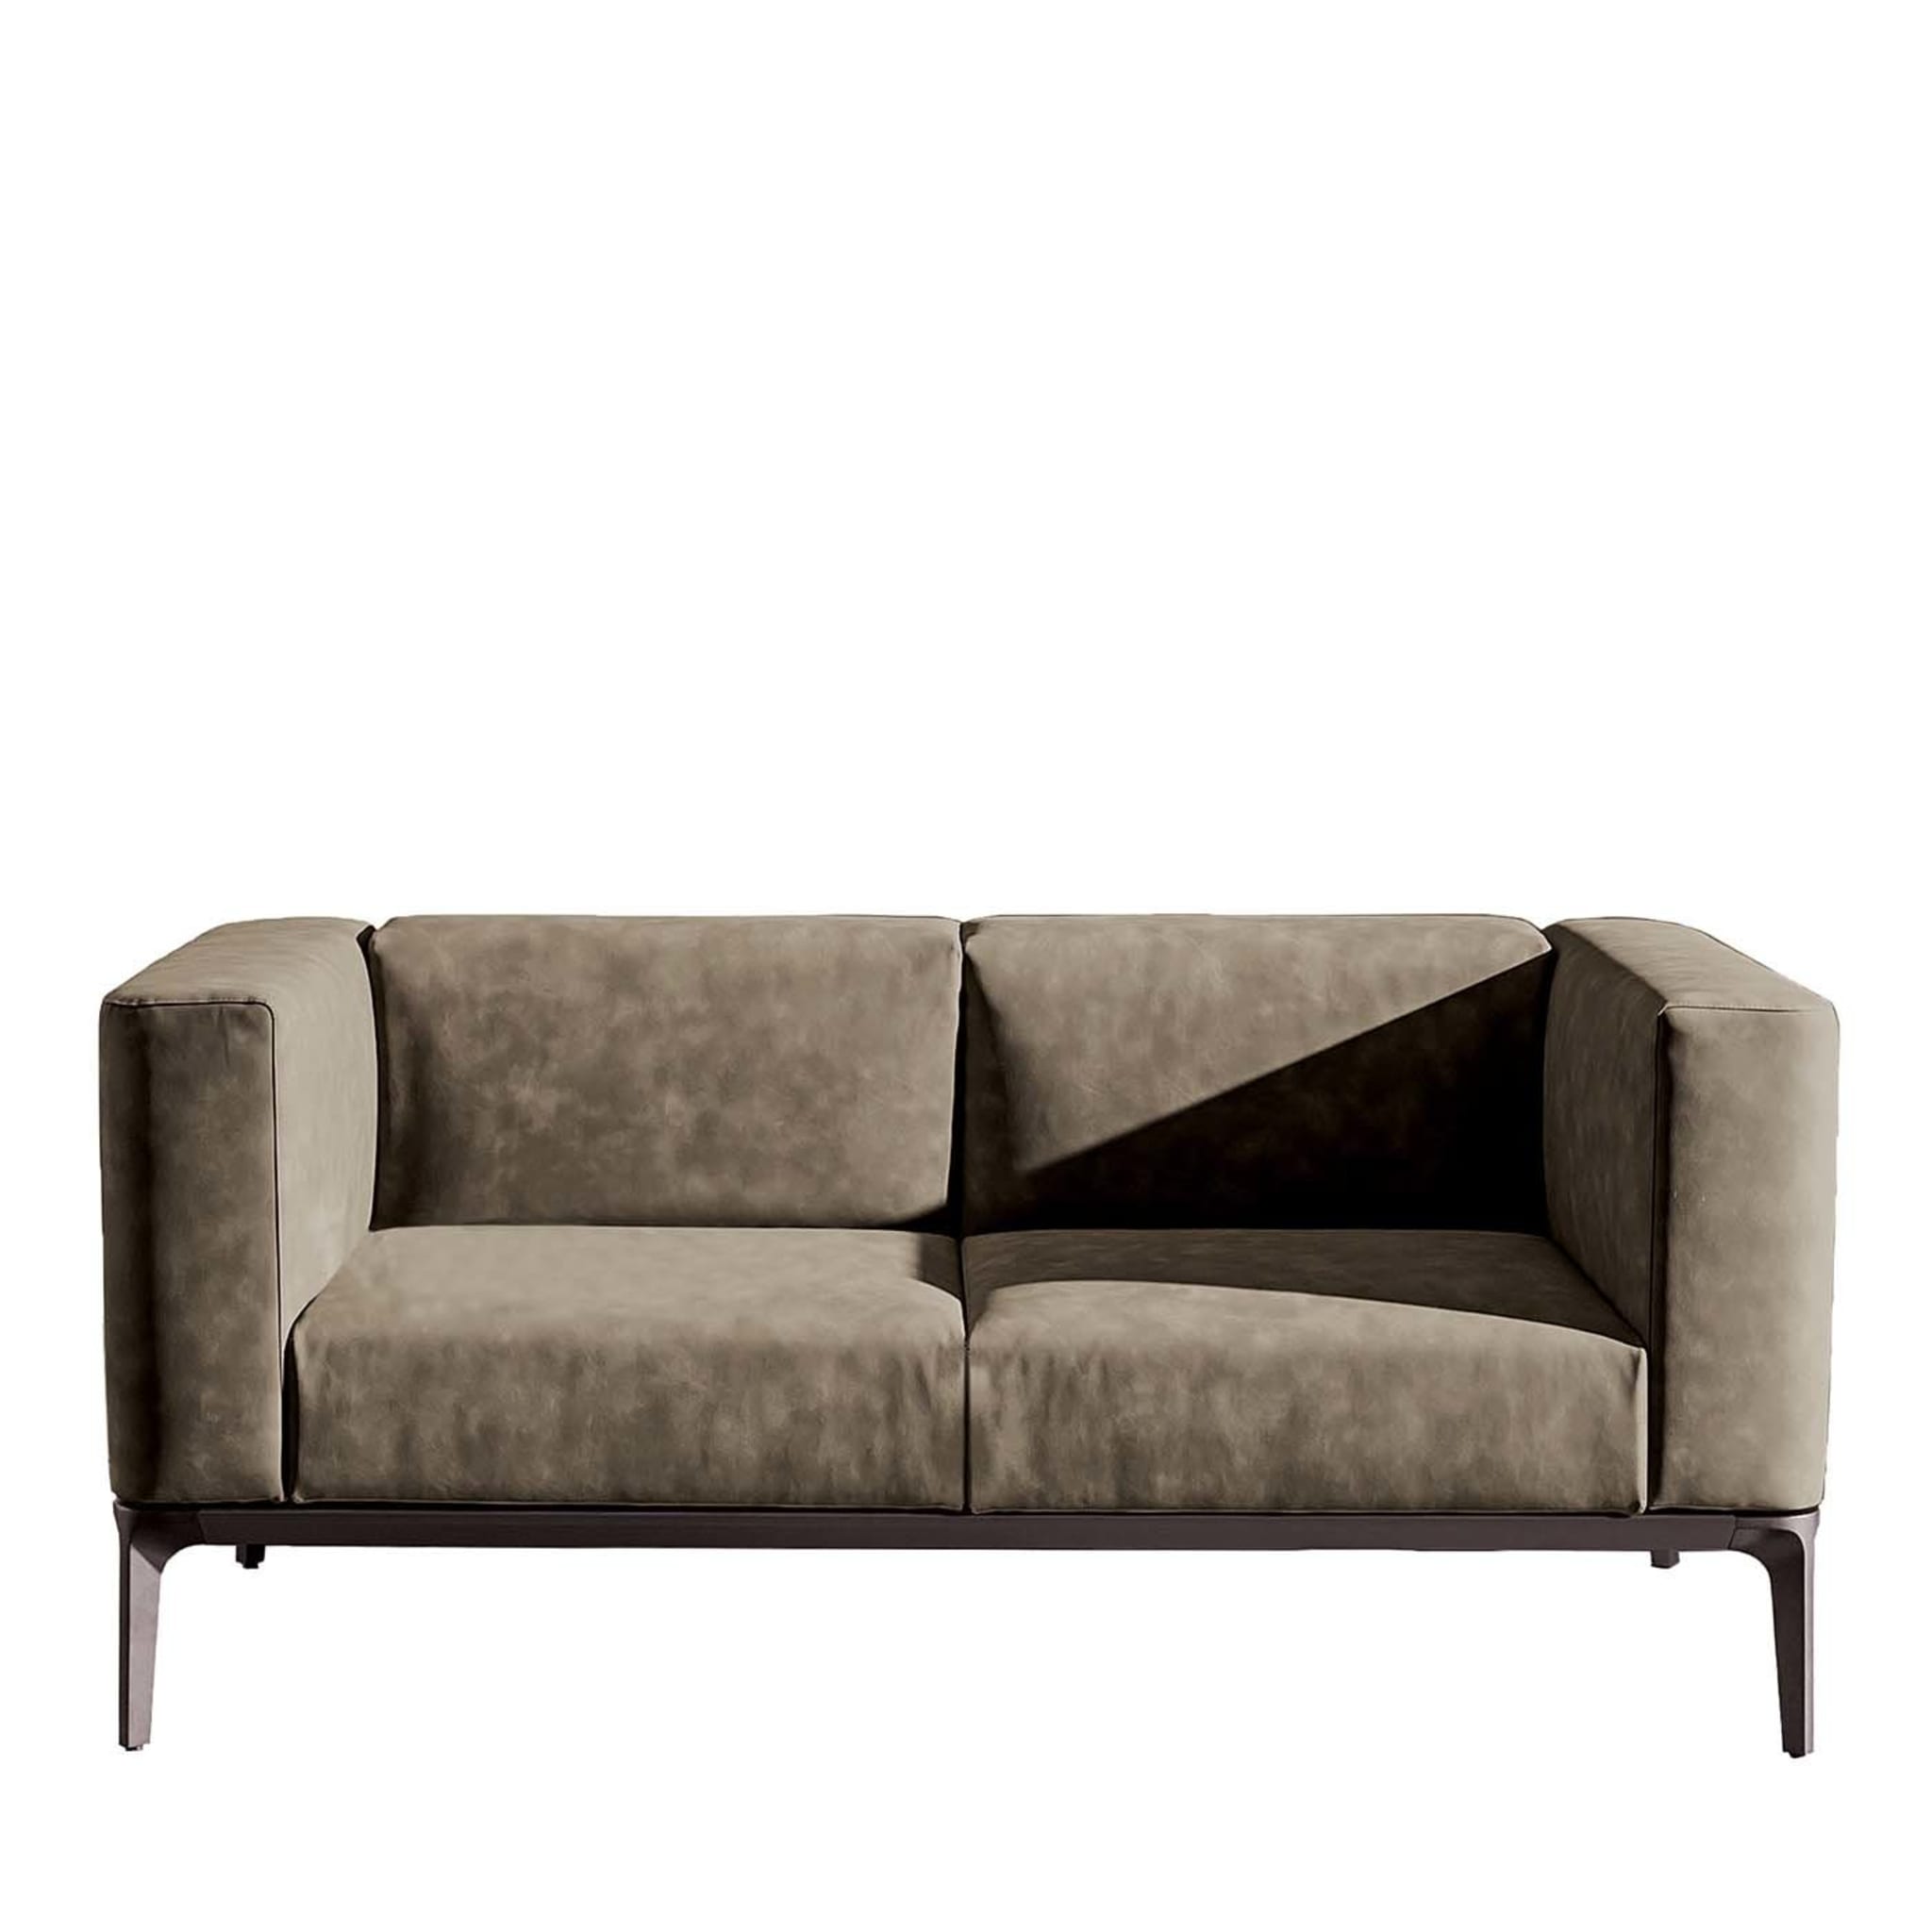 Slim 2-Seater Sofa in Brown Leather - Main view